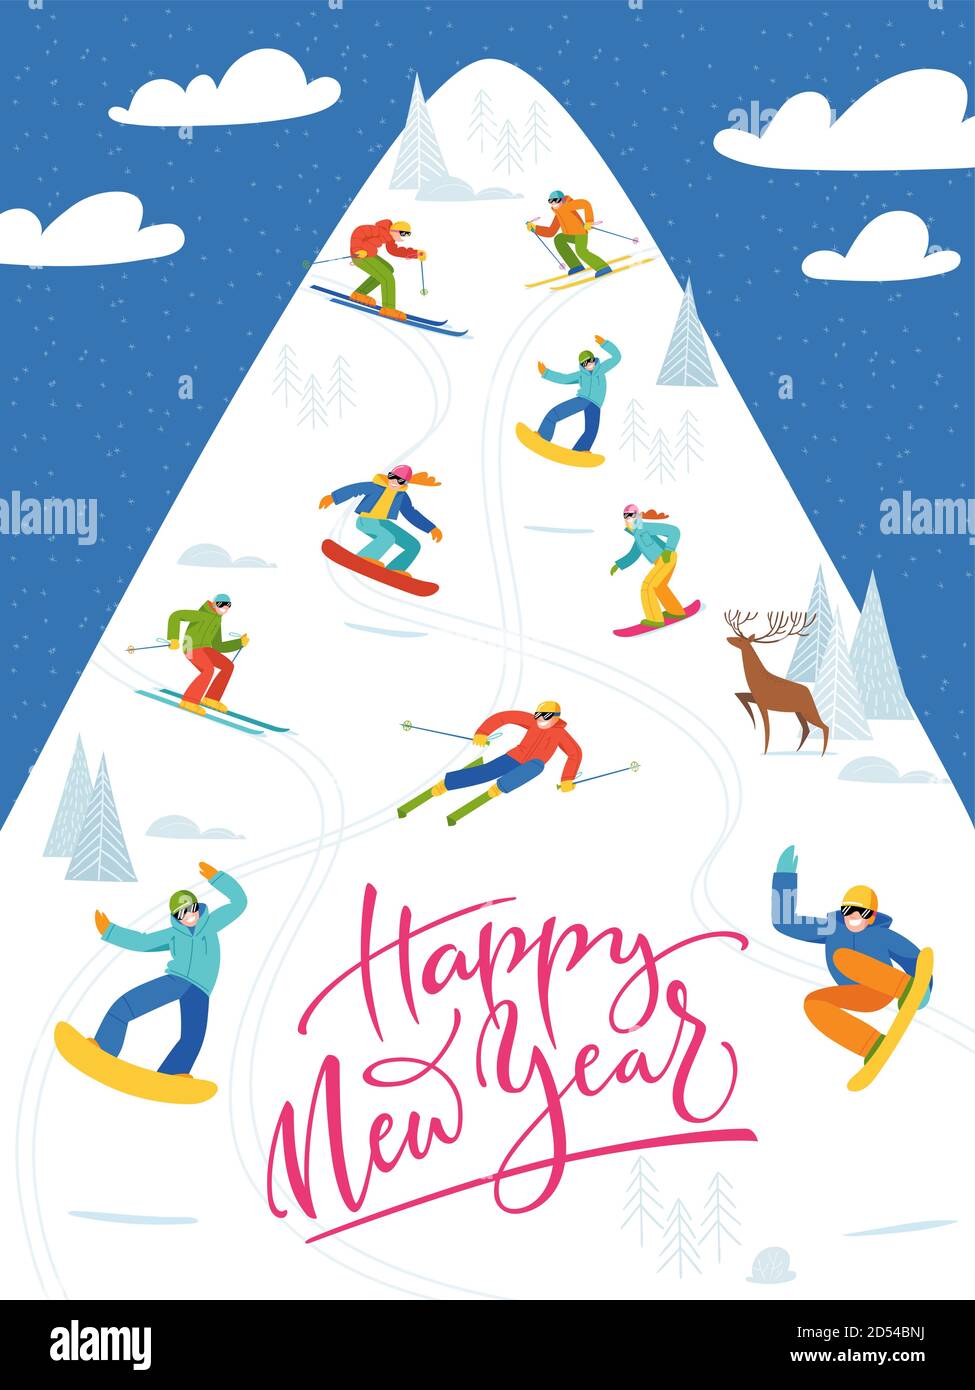 Holiday ski resort poster with people doing winter sports. Stock Vector